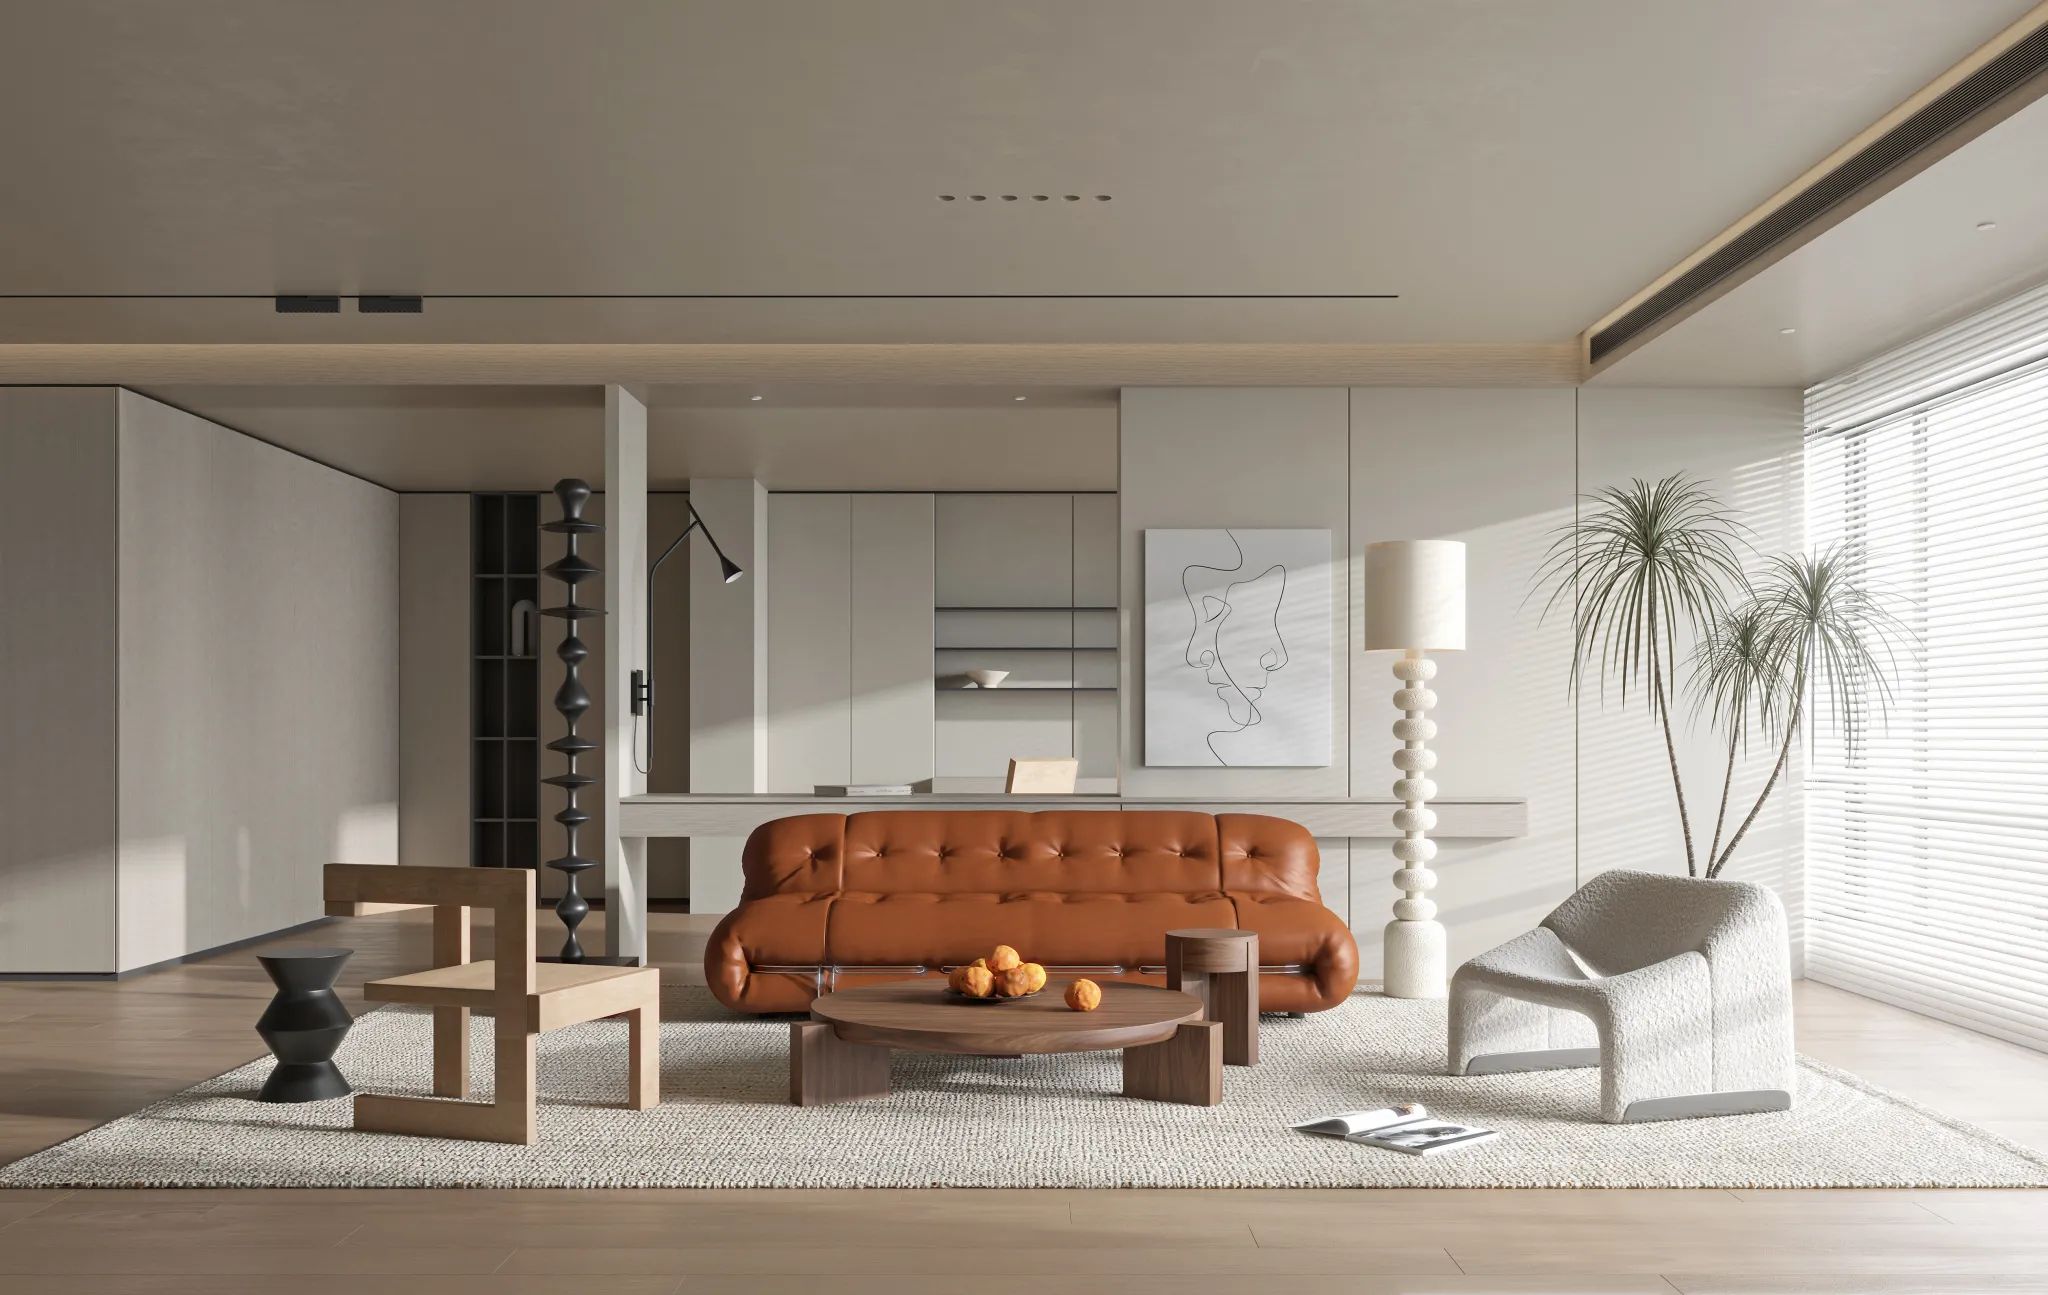 HOUSE SPACE 3D SCENES – LIVING ROOM – 0177